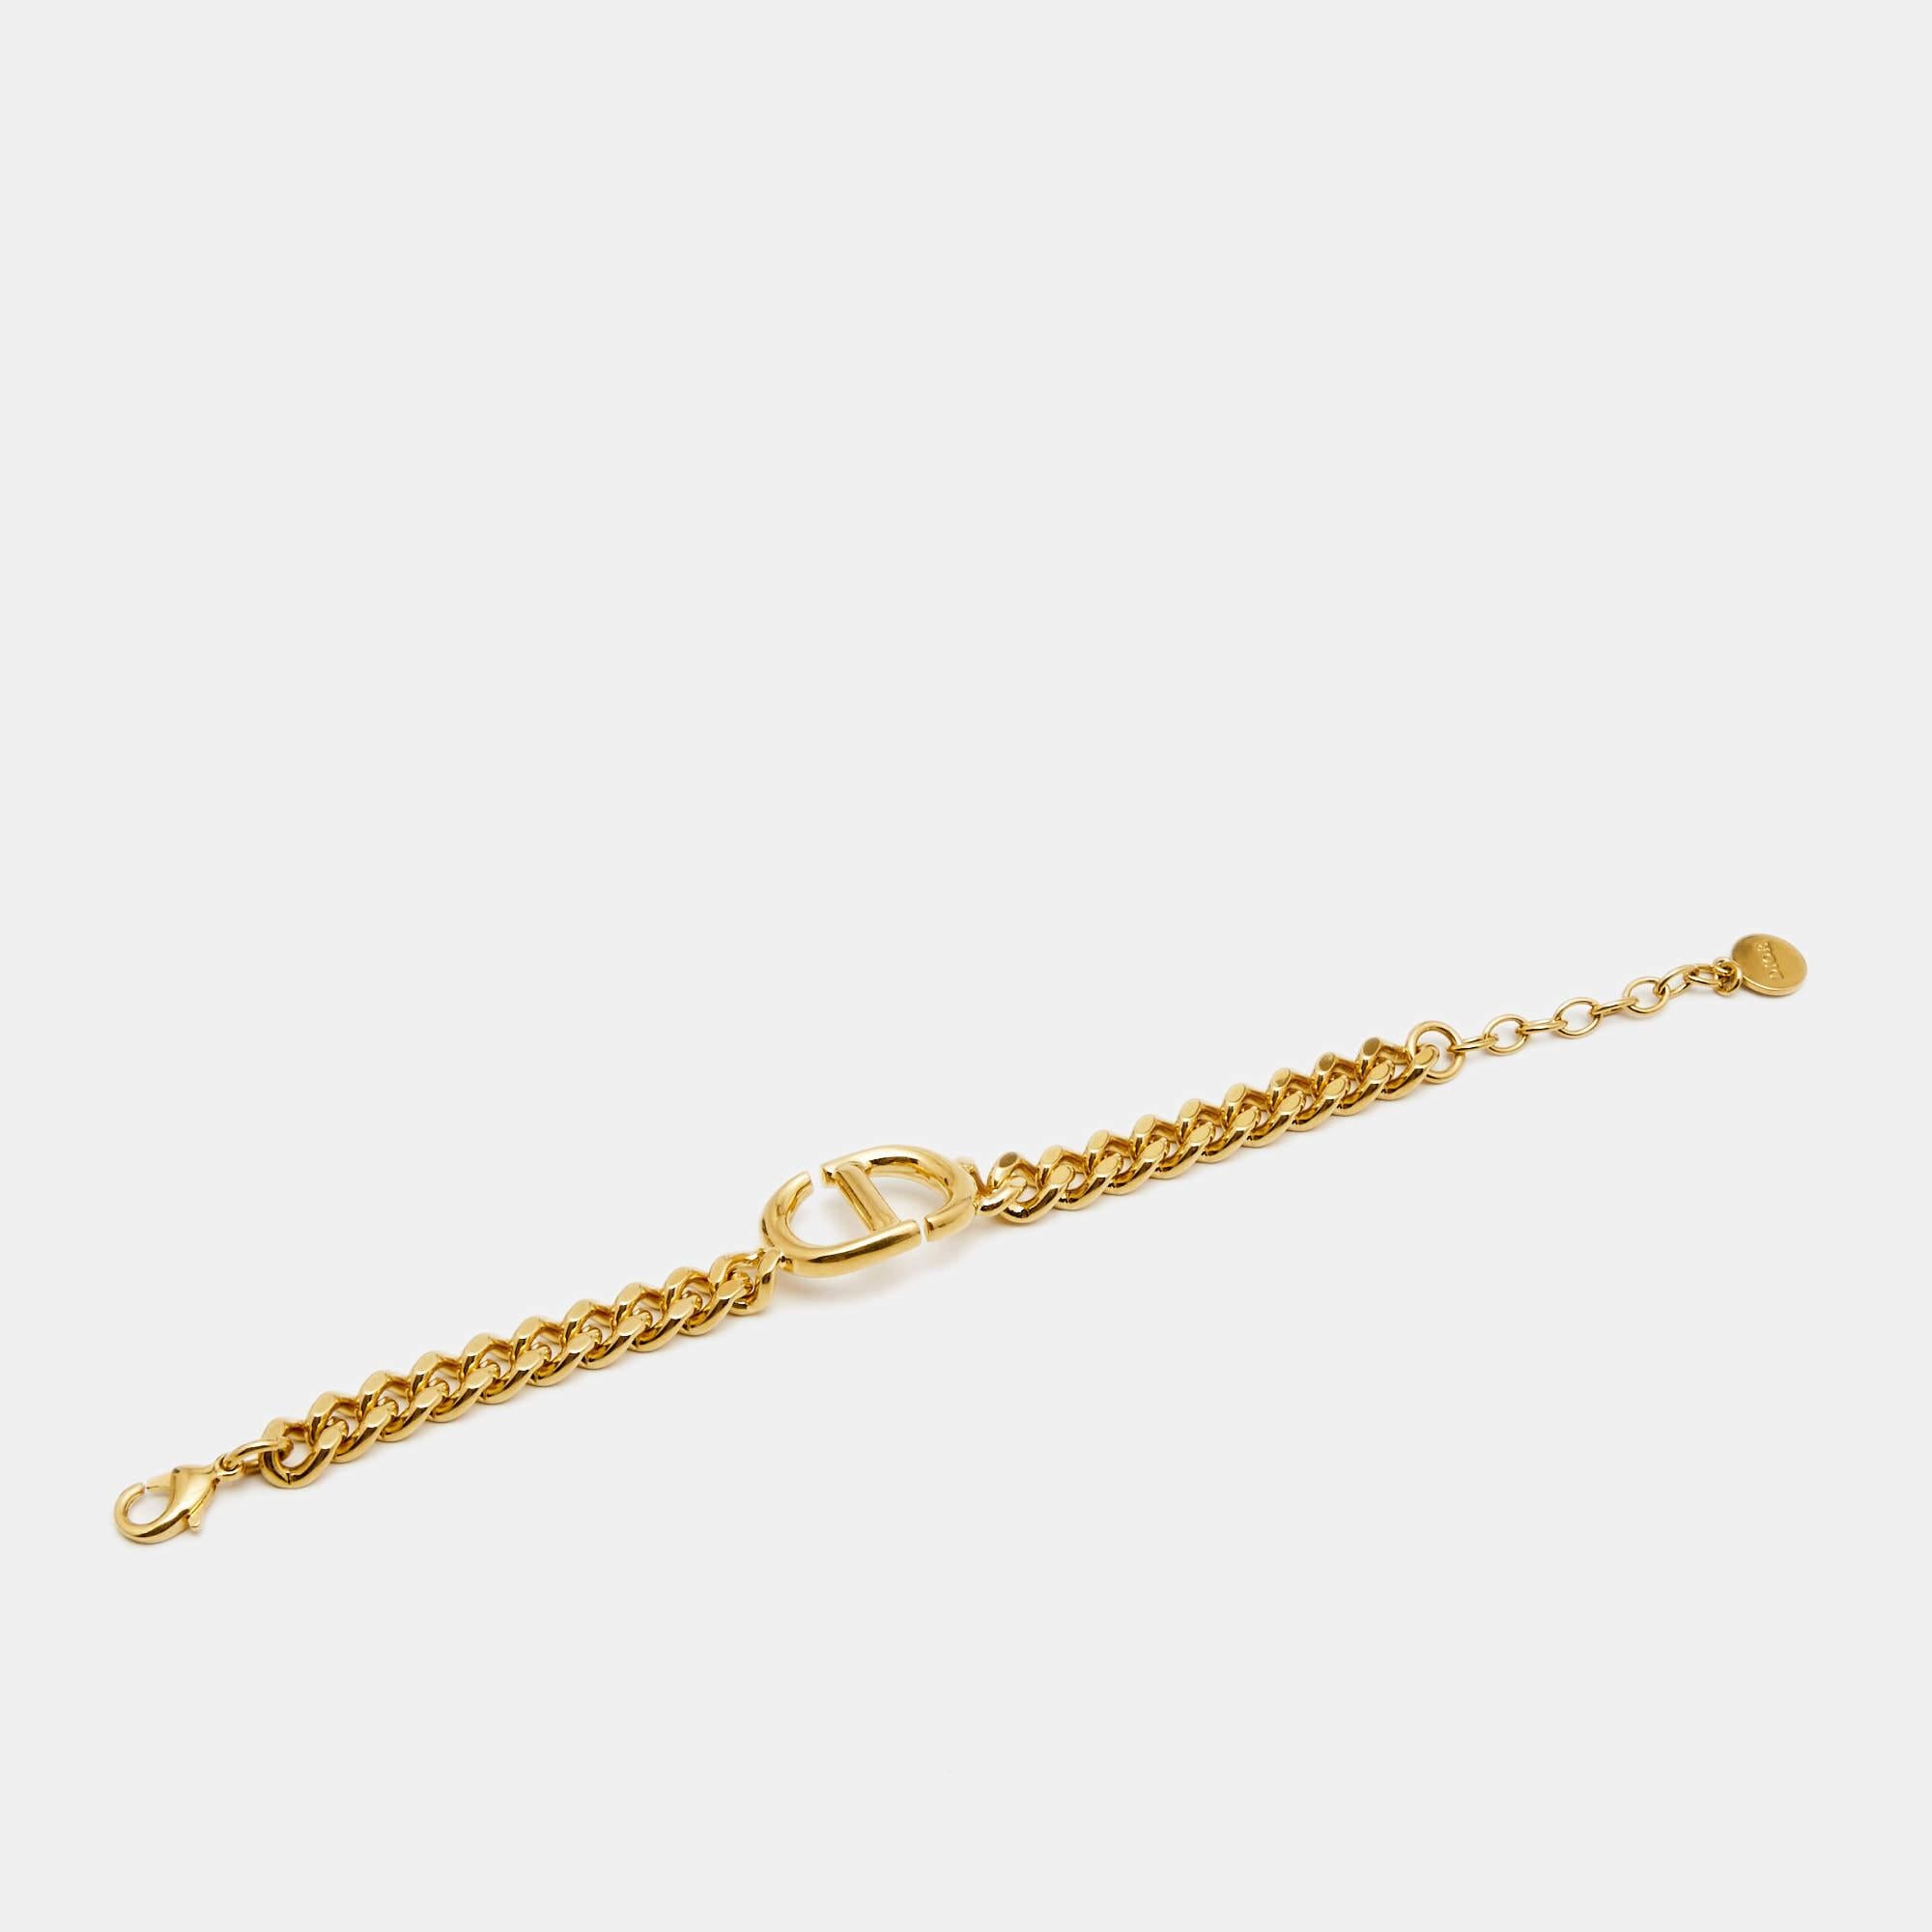 The Dior 30 Montaigne gold-tone bracelet is an exquisite accessory that exudes elegance and sophistication. Crafted in a lustrous gold tone, this bracelet features a sleek and minimalist design, showcasing the iconic 